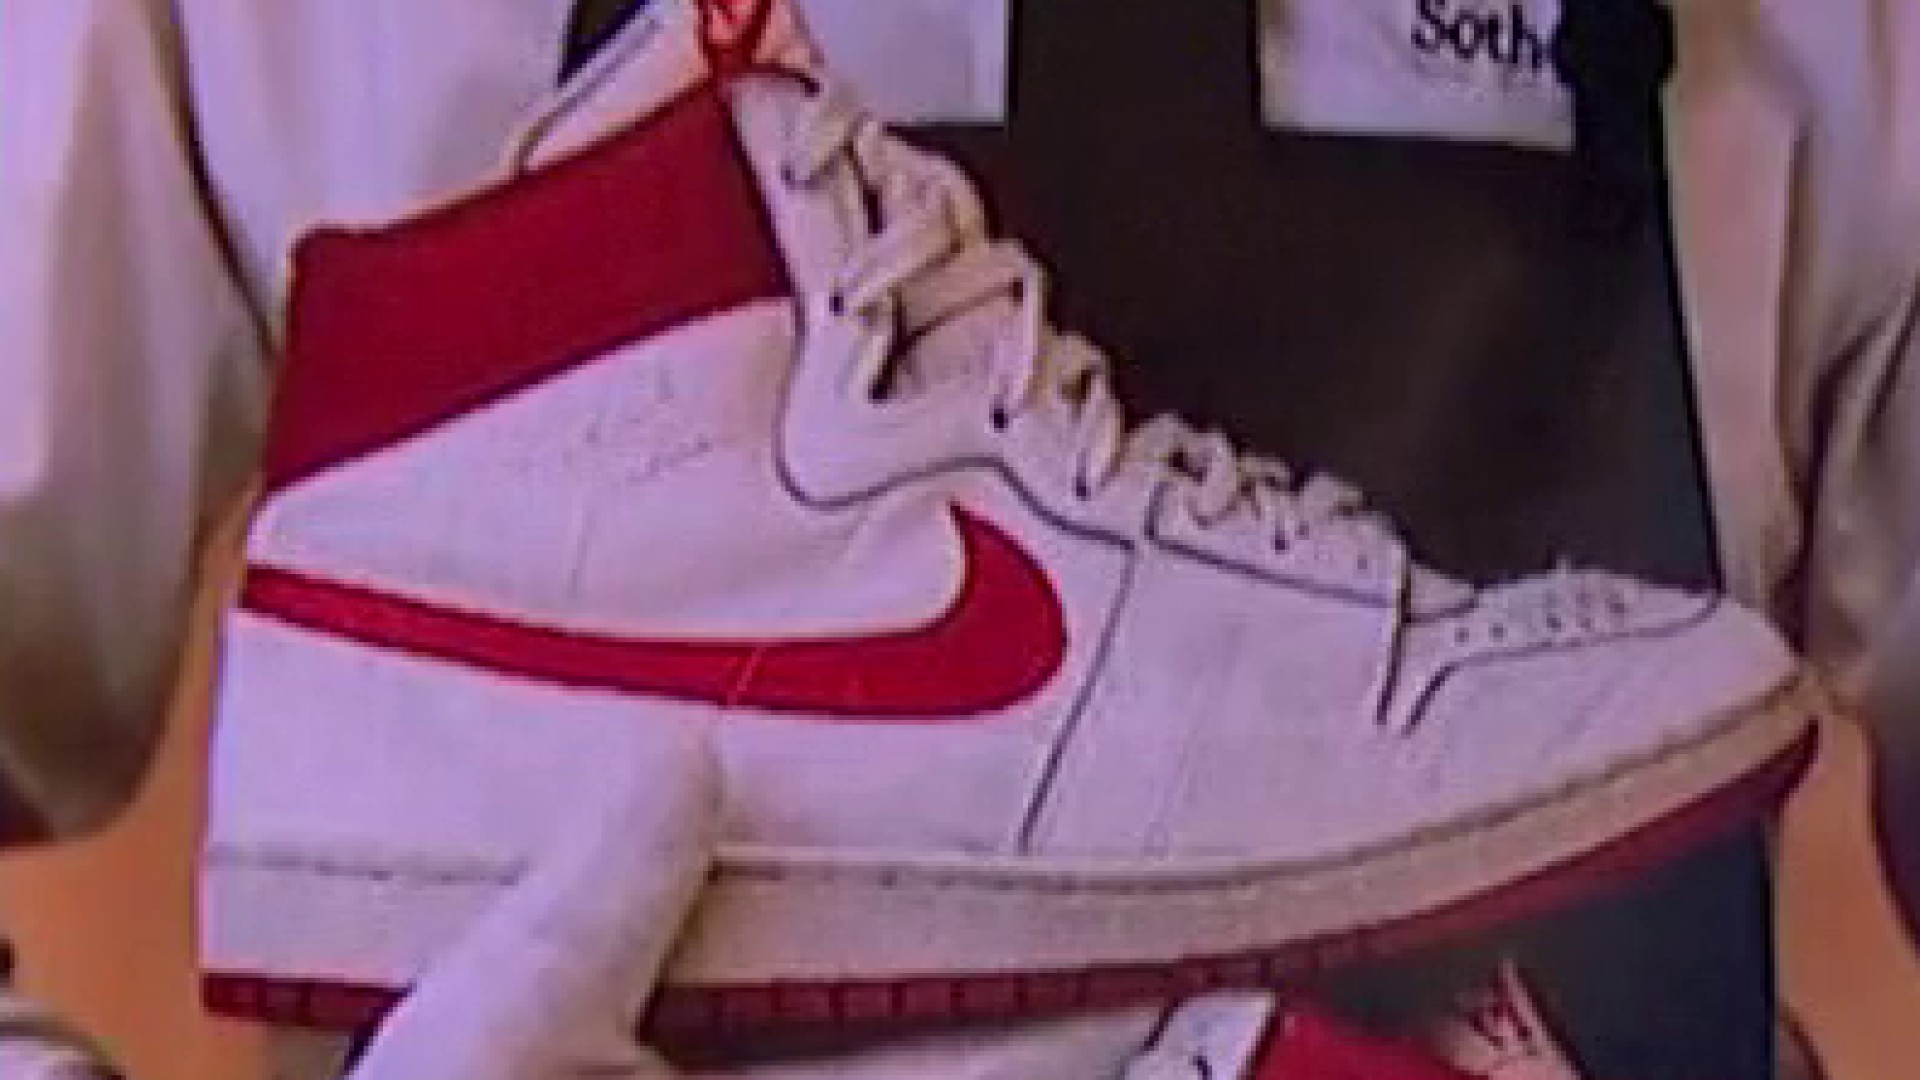 Michael Jordan's 1984 Nike sell record $1.5M at Sotheby's